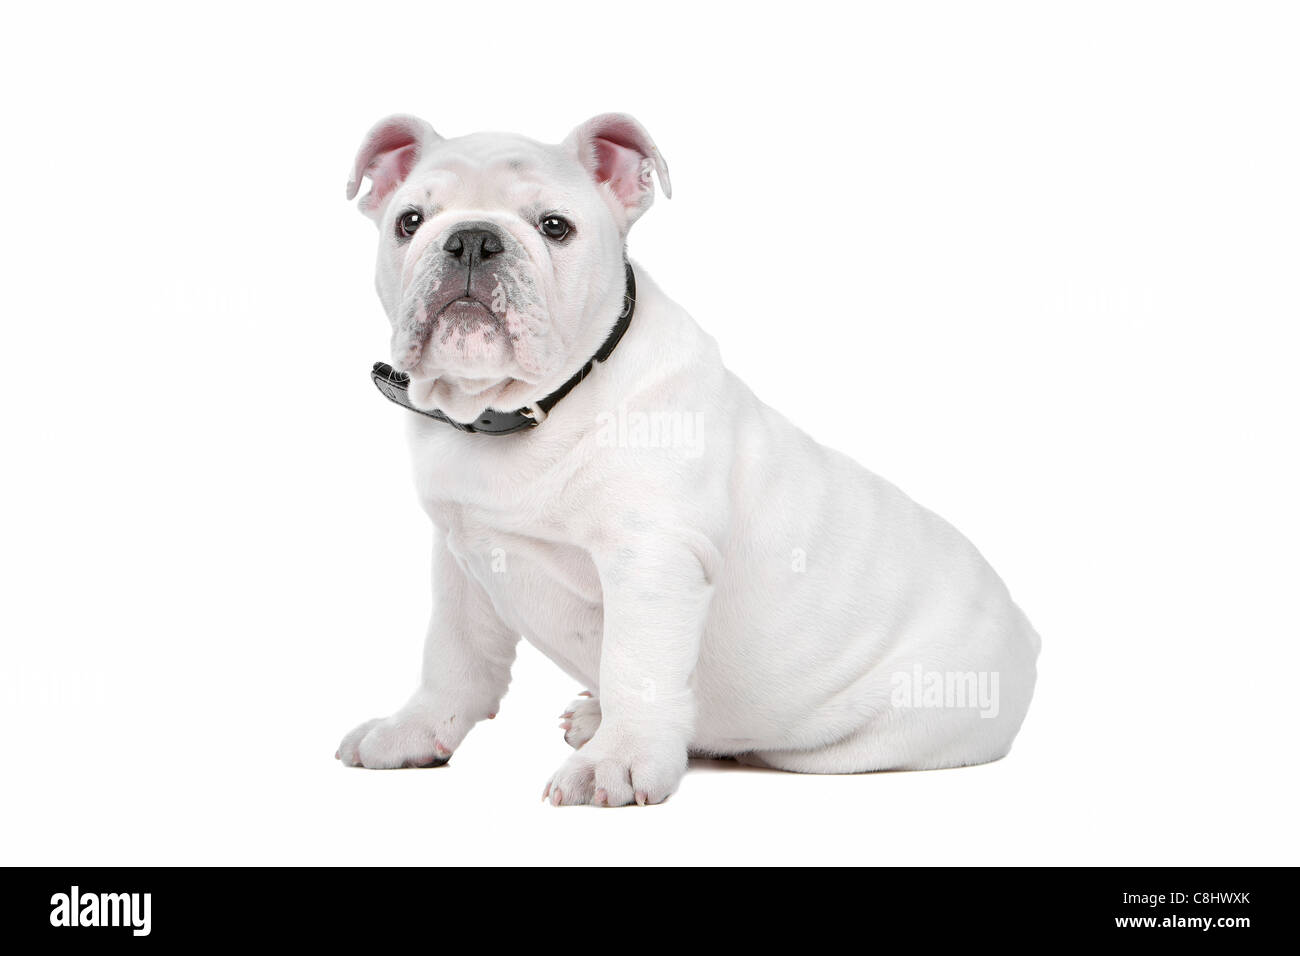 White English bulldog puppy in front of a white background Stock Photo